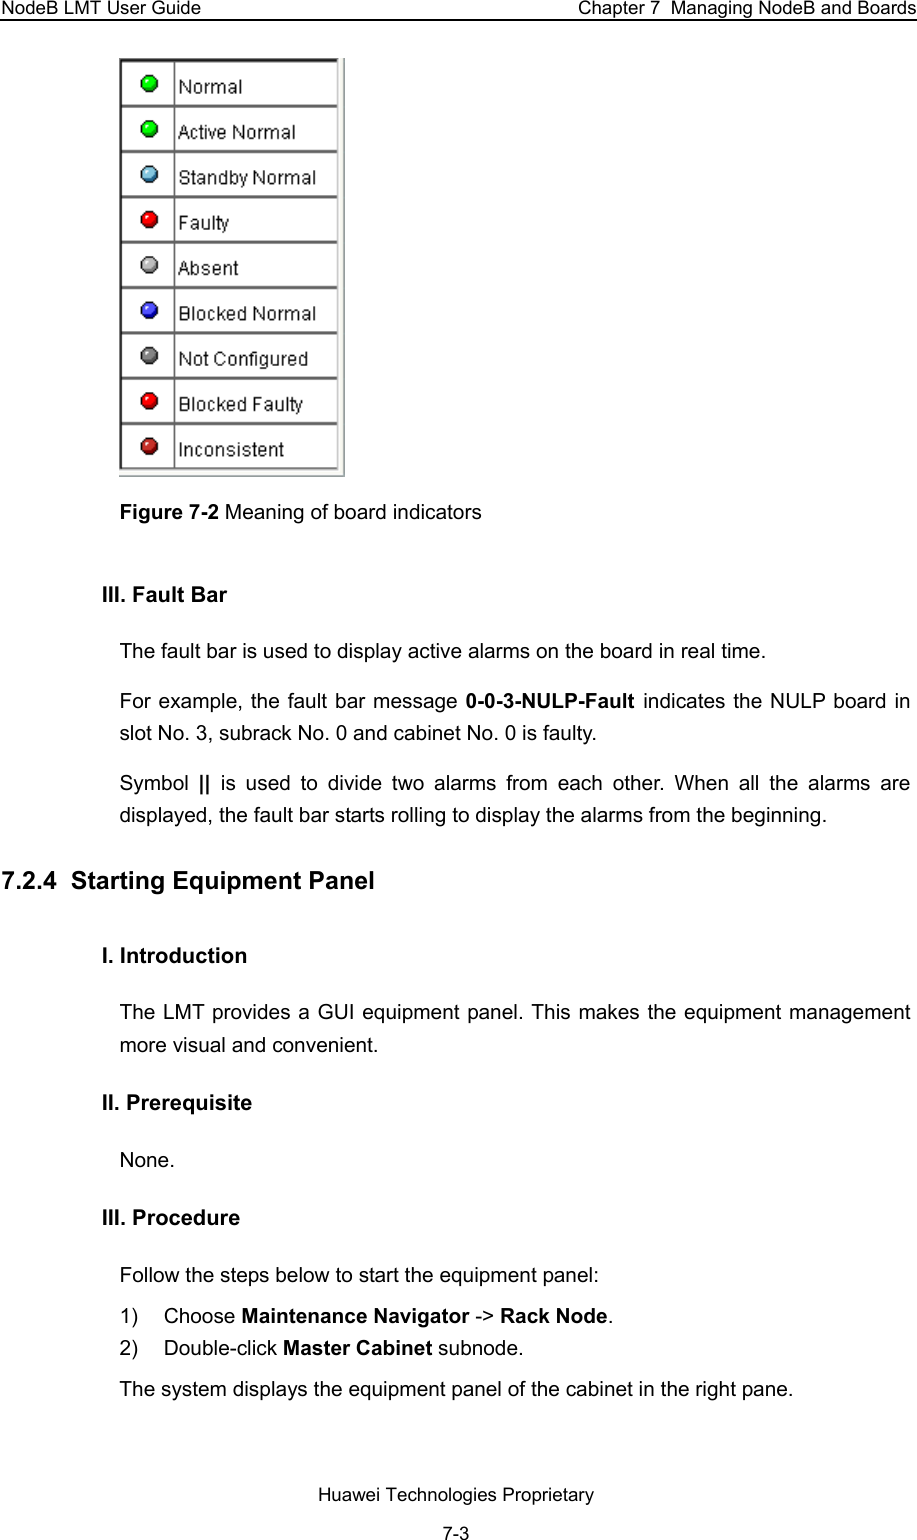 NodeB LMT User Guide  Chapter 7  Managing NodeB and Boards  Figure 7-2 Meaning of board indicators III. Fault Bar  The fault bar is used to display active alarms on the board in real time.  For example, the fault bar message 0-0-3-NULP-Fault  indicates the NULP board in slot No. 3, subrack No. 0 and cabinet No. 0 is faulty.  Symbol  ||  is used to divide two alarms from each other. When all the alarms are displayed, the fault bar starts rolling to display the alarms from the beginning.  7.2.4  Starting Equipment Panel I. Introduction The LMT provides a GUI equipment panel. This makes the equipment management more visual and convenient.  II. Prerequisite None.  III. Procedure Follow the steps below to start the equipment panel:  1) Choose Maintenance Navigator -&gt; Rack Node.  2) Double-click Master Cabinet subnode.  The system displays the equipment panel of the cabinet in the right pane.  Huawei Technologies Proprietary 7-3 